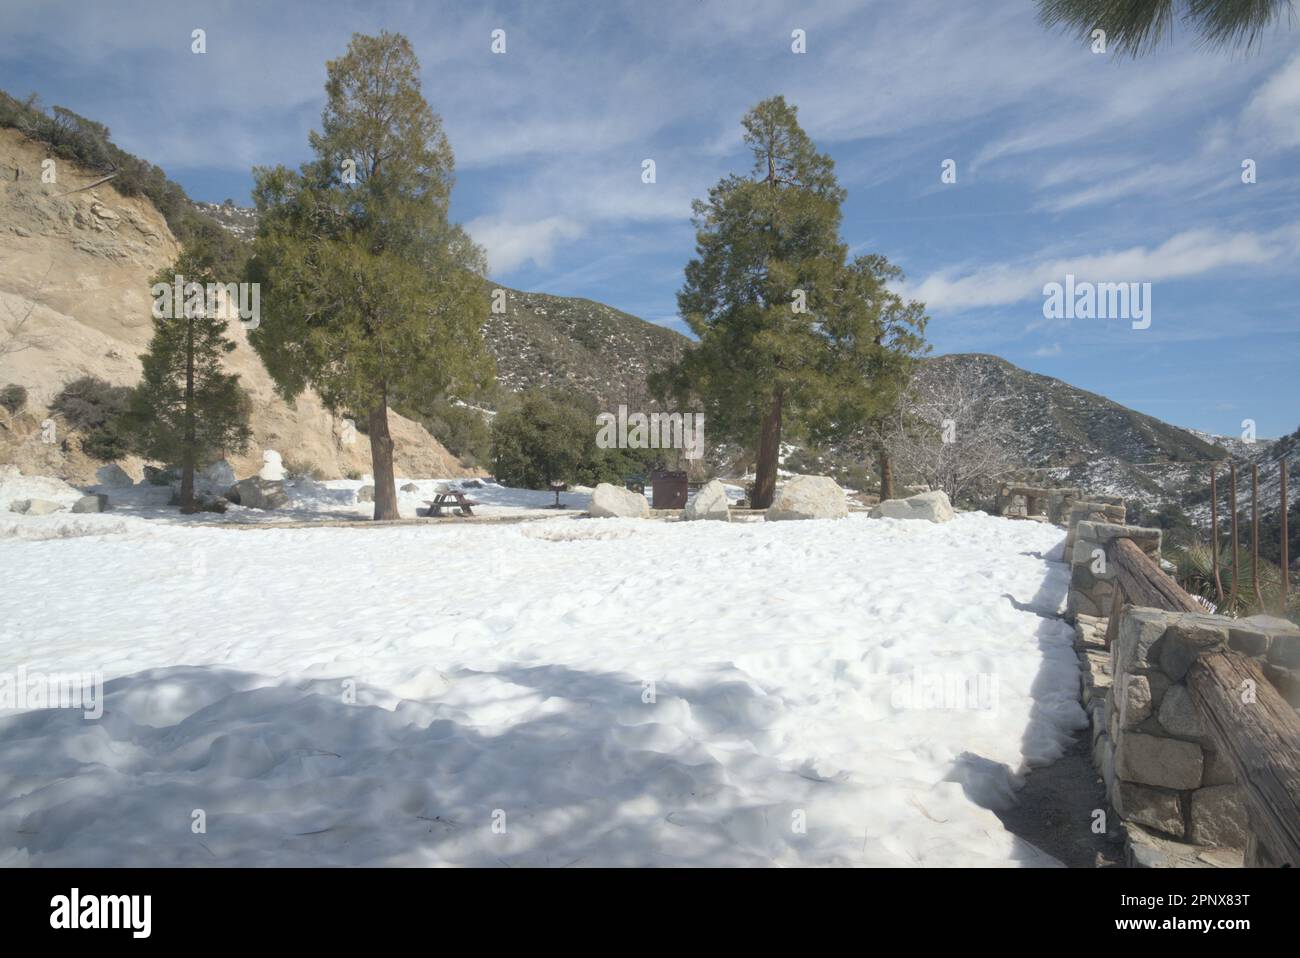 Angeles National forest covered in snow, mother nature's beauty and wonderment mountains 40 miles east of downtown LA,. California lifestyle Stock Photo